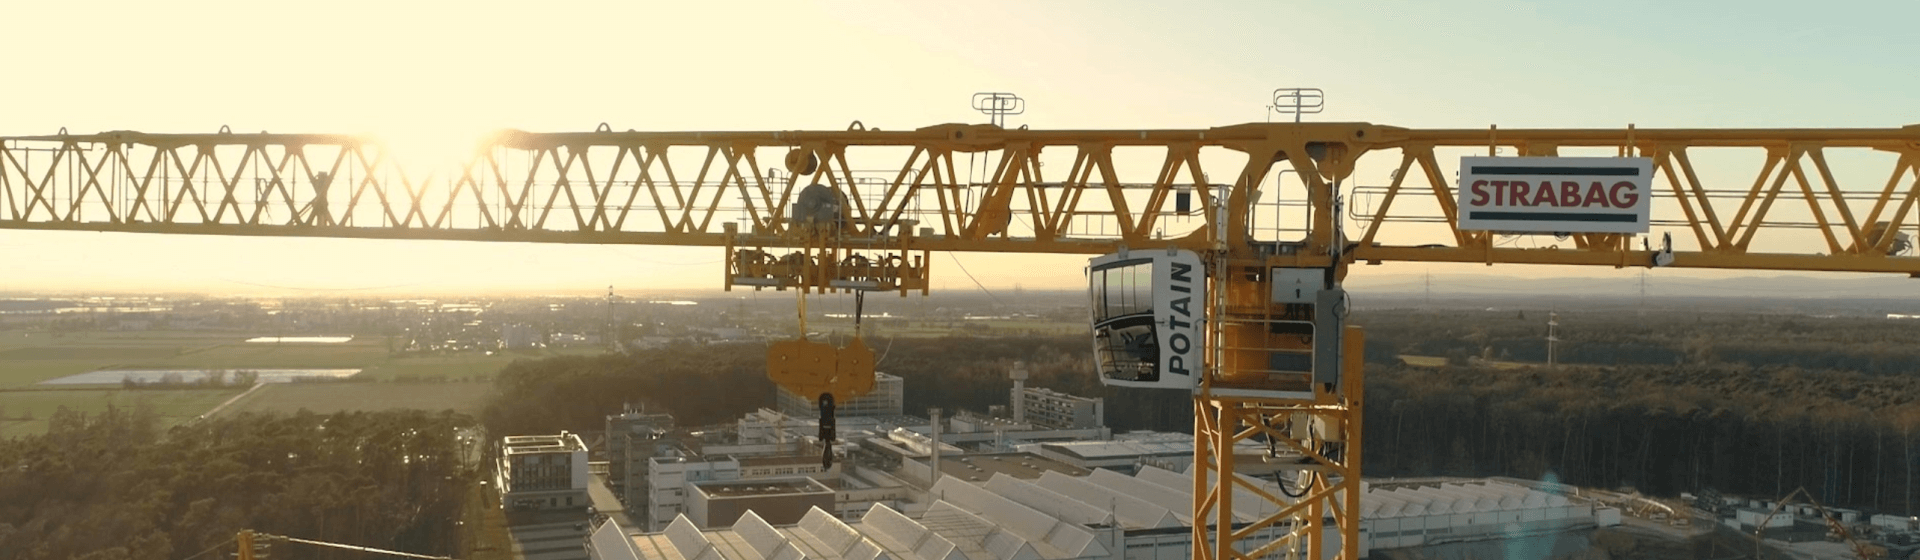 Strabag-deploys-largest-ever-Potain-topless-crane-MDT-809-for-FAIR-particle-accelerator-facility-construction-in-Germany-1.png